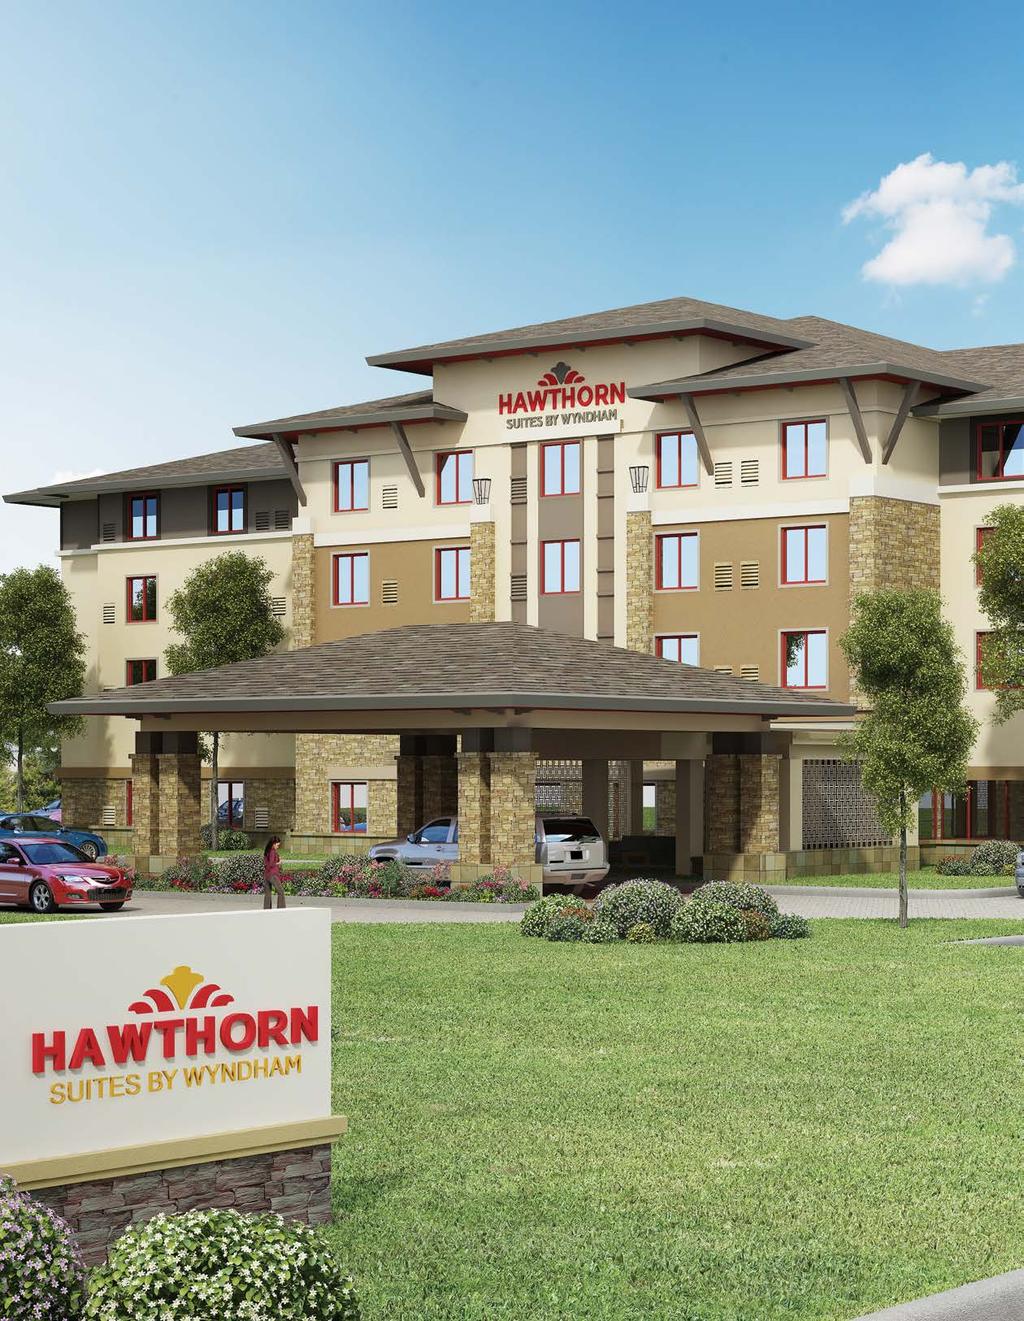 A BRAND WITH STAYING POWER HAWTHORN SUITES BY WYNDHAM IS THE EXTENDED-STAY BRAND WITHIN THE WYNDHAM REWARDS FAMILY.